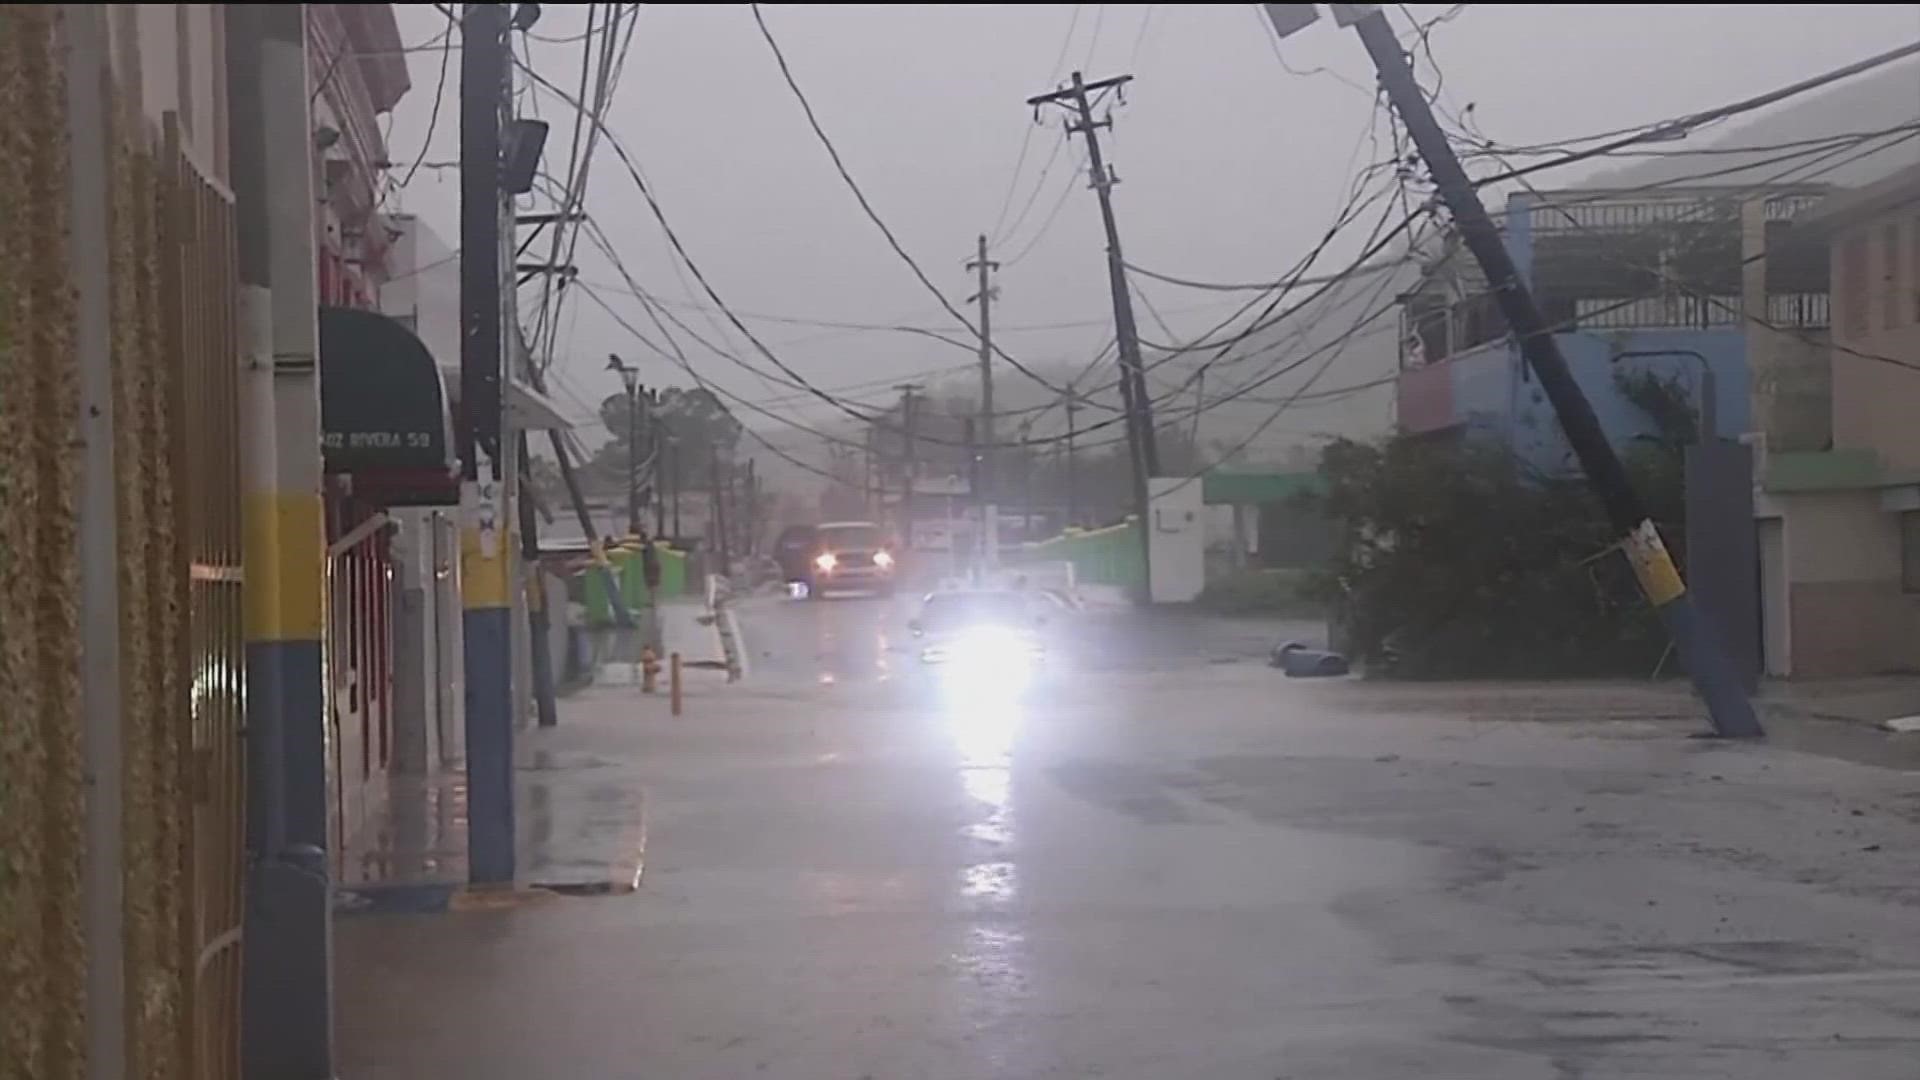 With 115 mph winds and heavy rain, Fiona pounded Puerto Rico on Sunday, leaving millions of people without power and water.